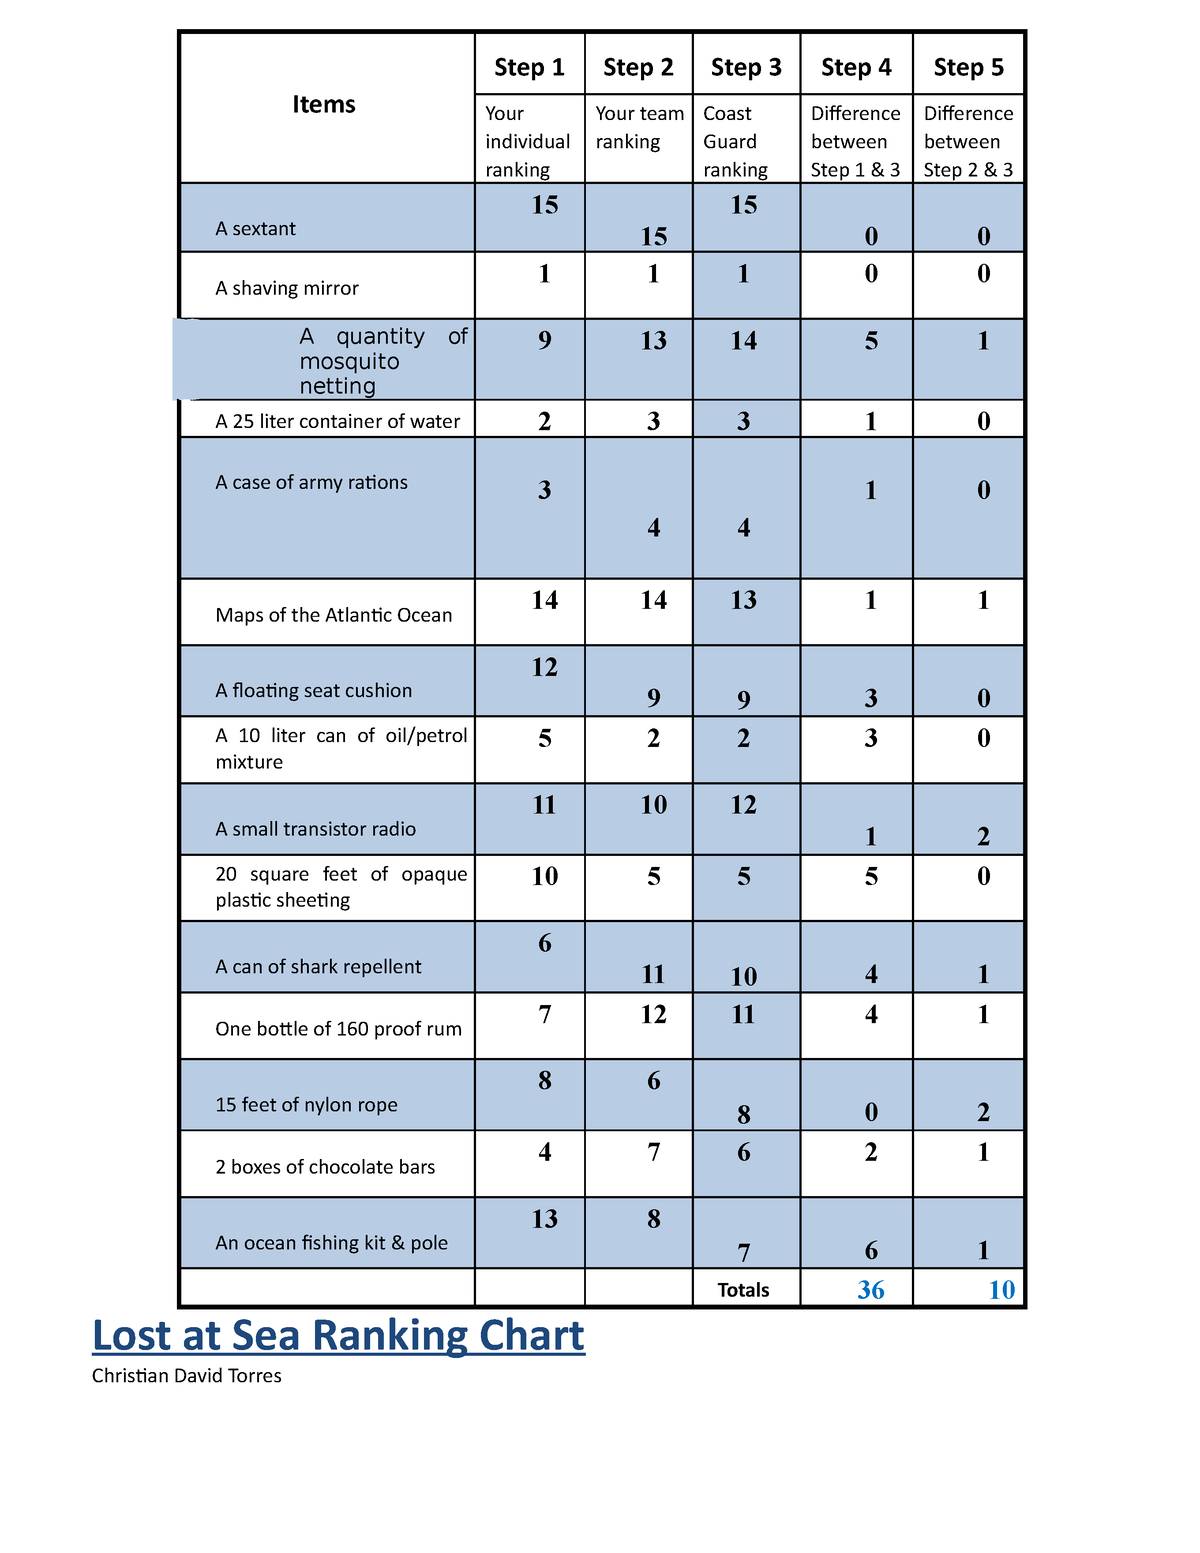 Dt lostatseachart about surviving Lost at Sea Ranking Chart